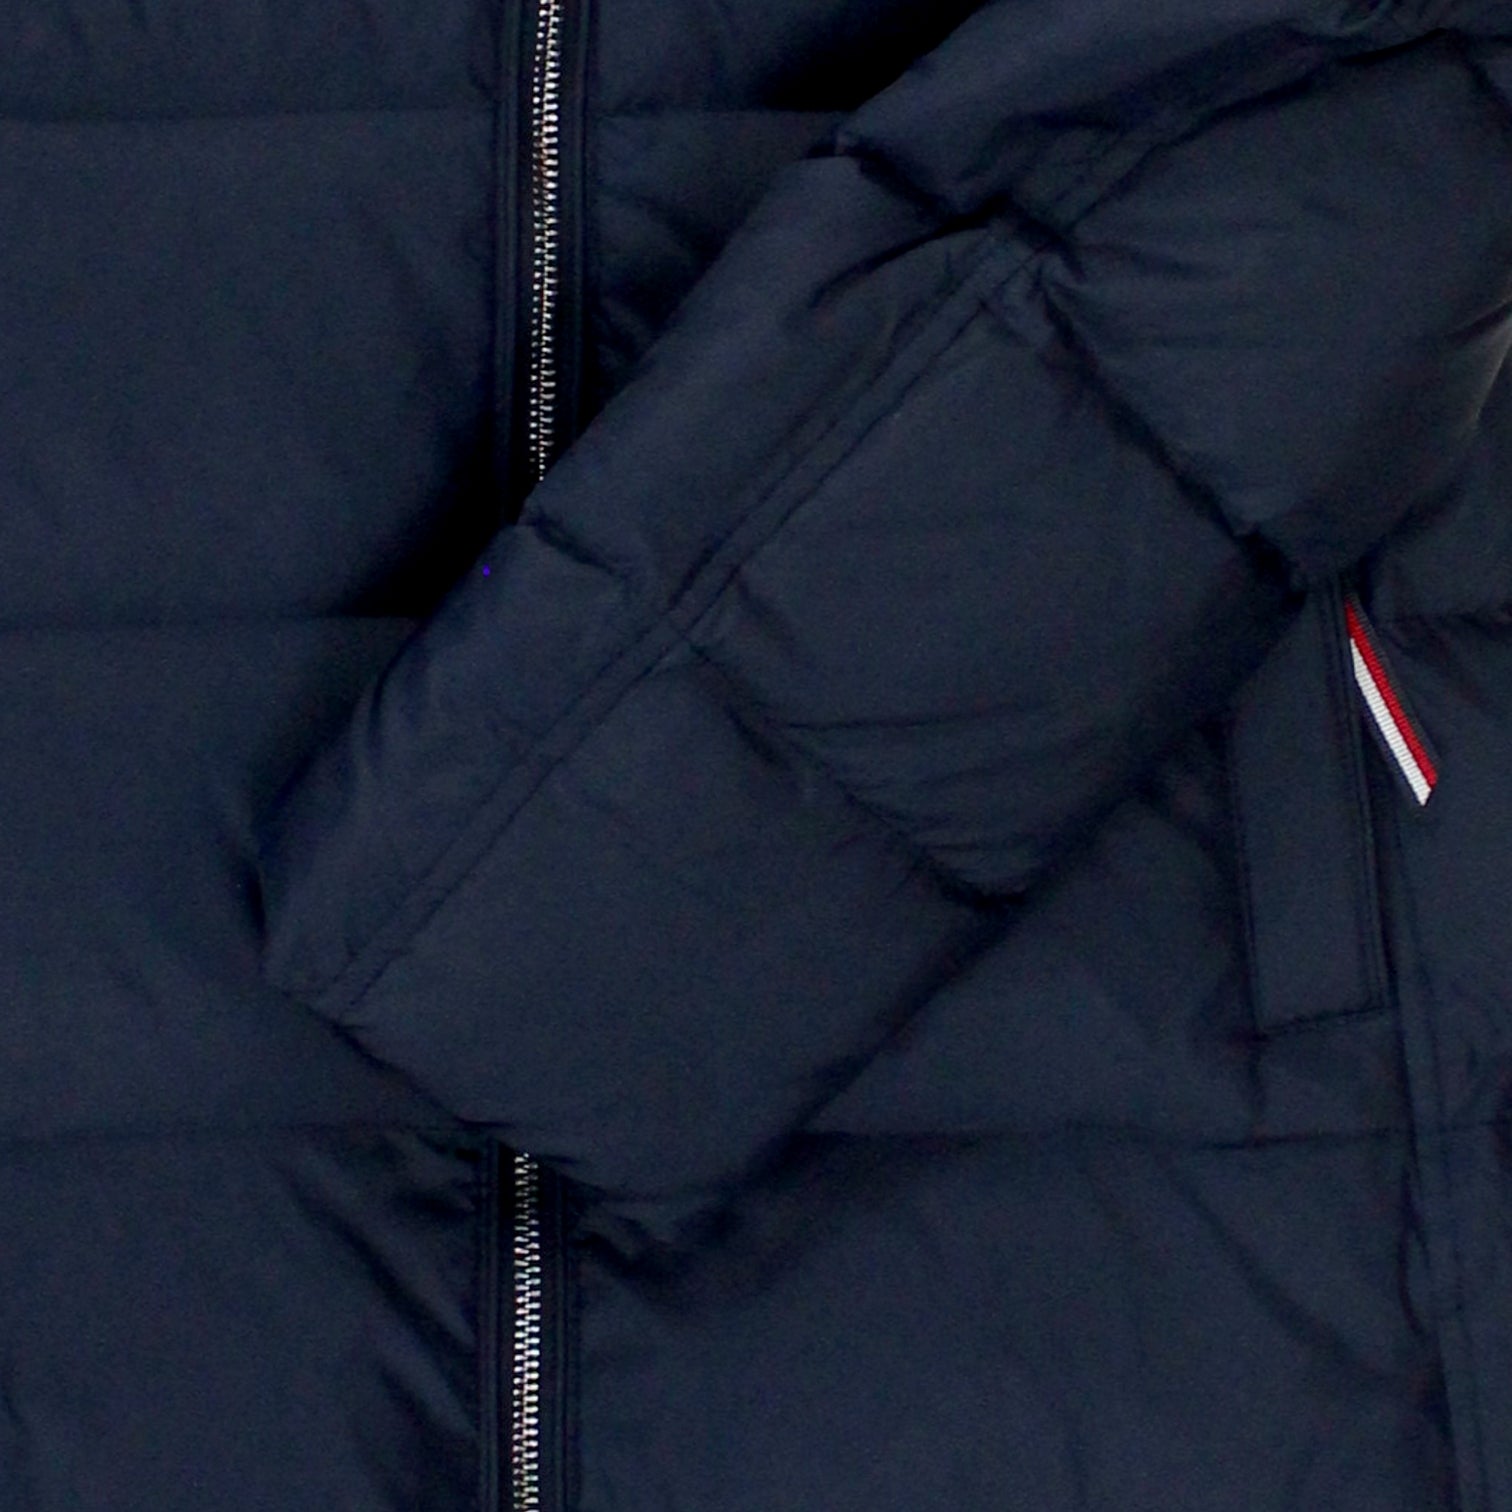 Tommy Hilfiger Navy Puffer Coat